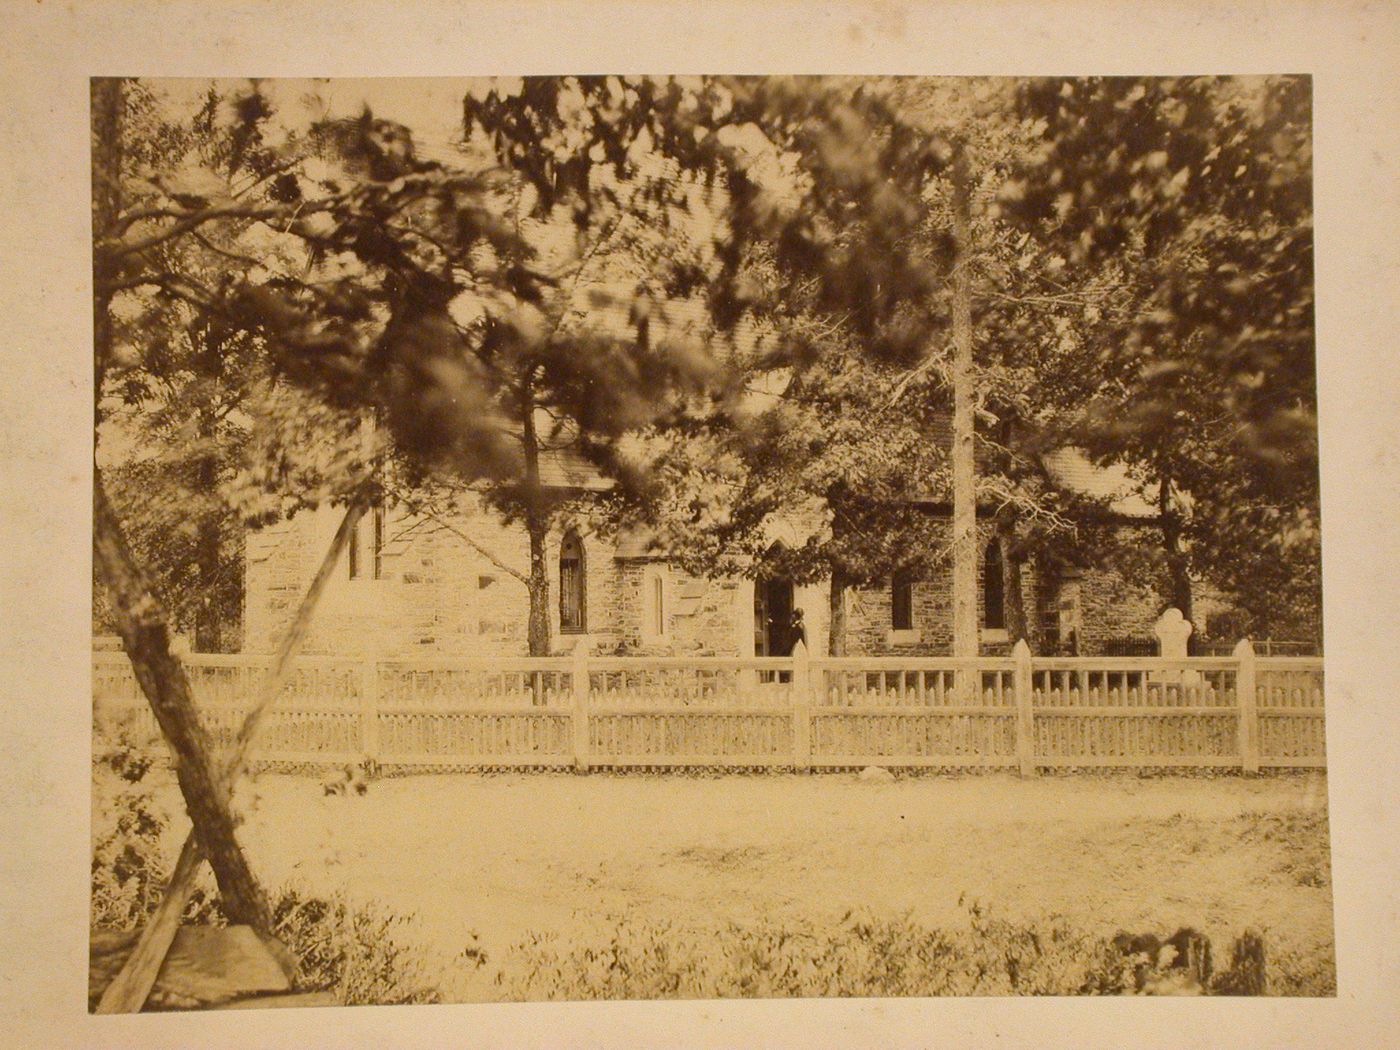 Out of focus view, obscured by trees, of a man entering a church, United States